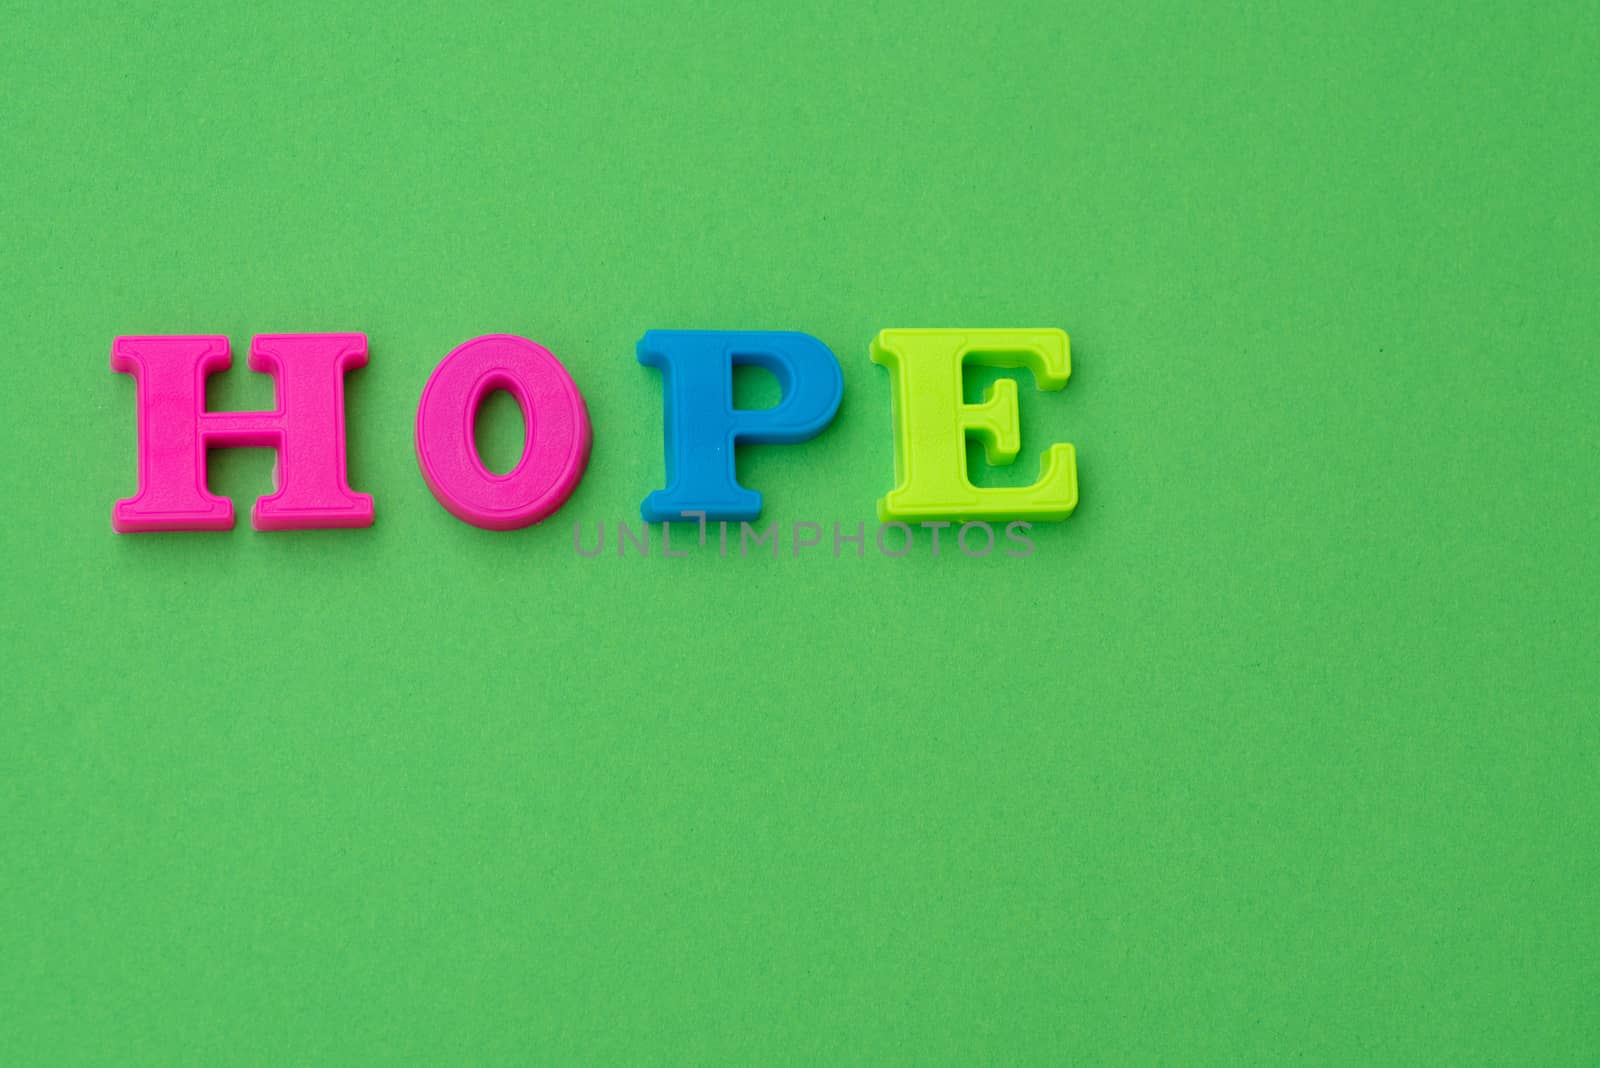 Hope spelled out against green background by rushay